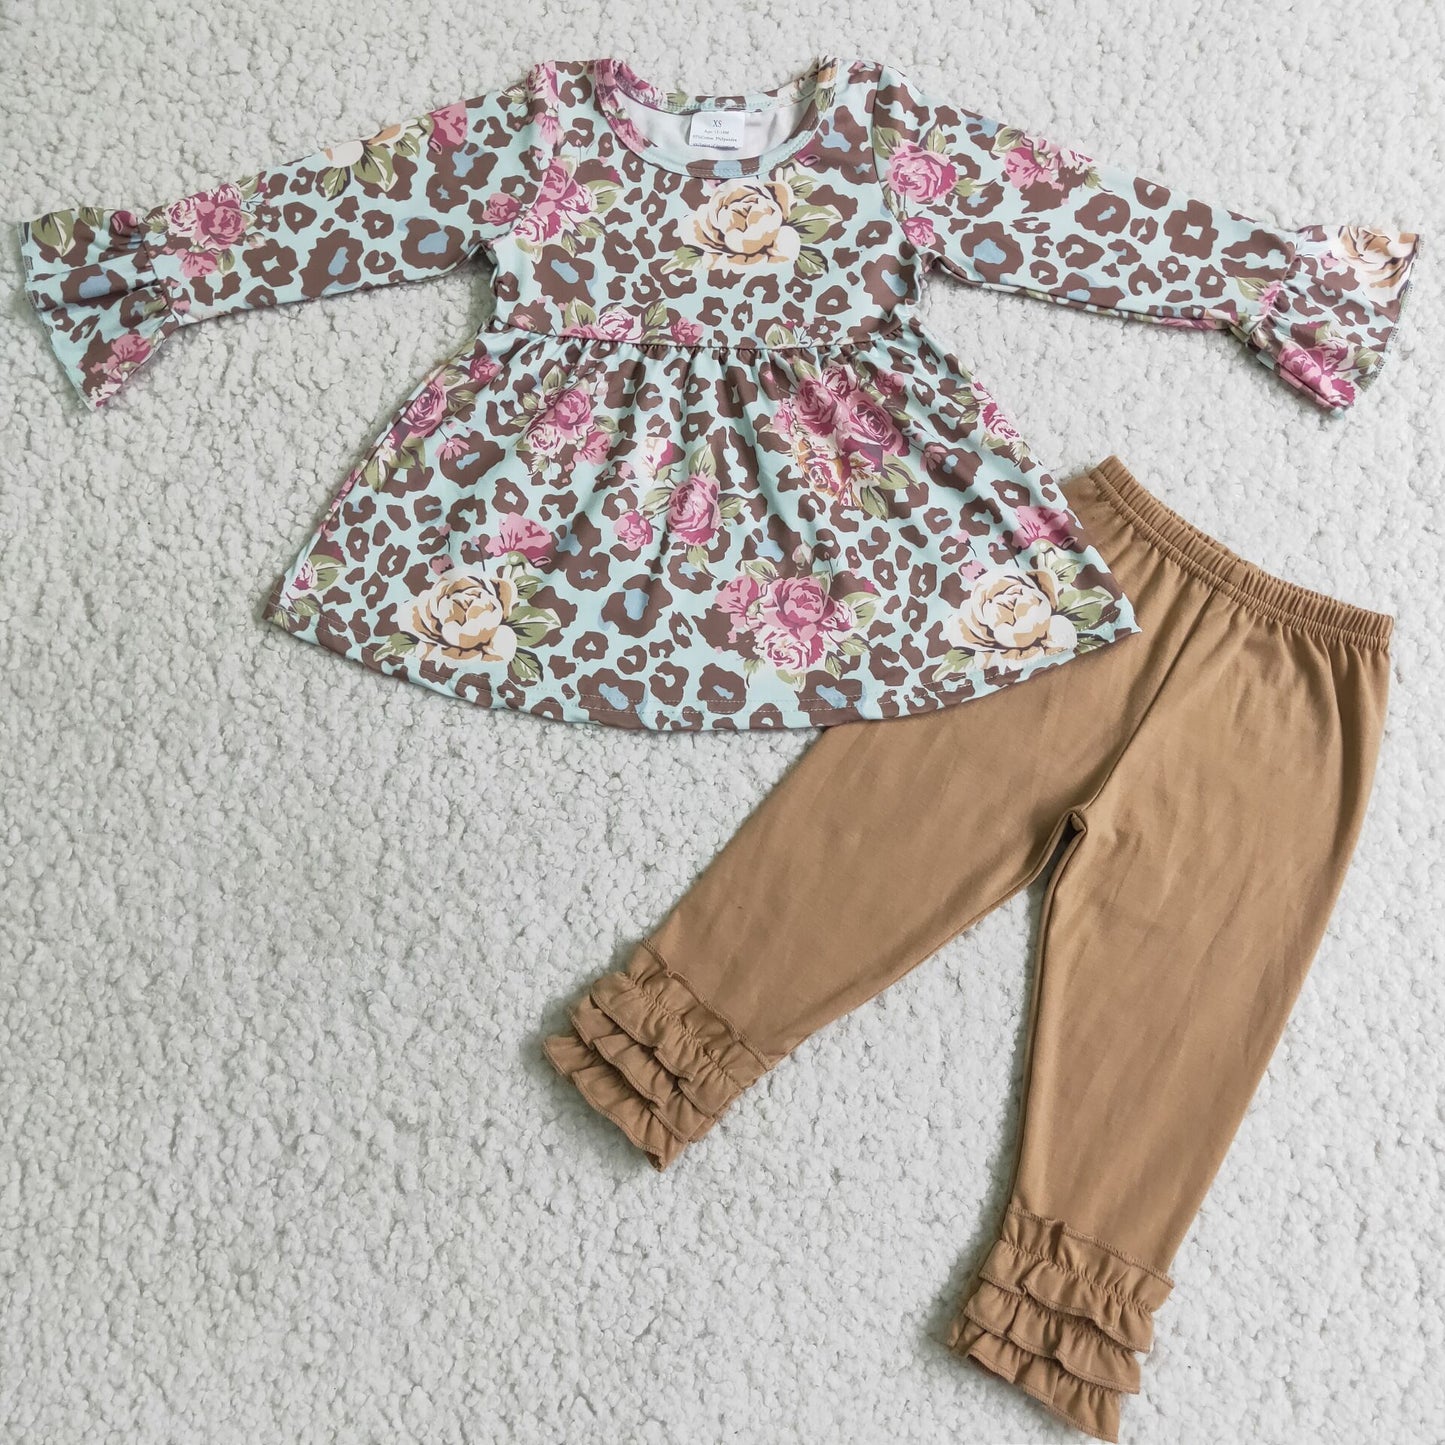 Leopard Floral Tunic Top Brown Ruffle Pants Set